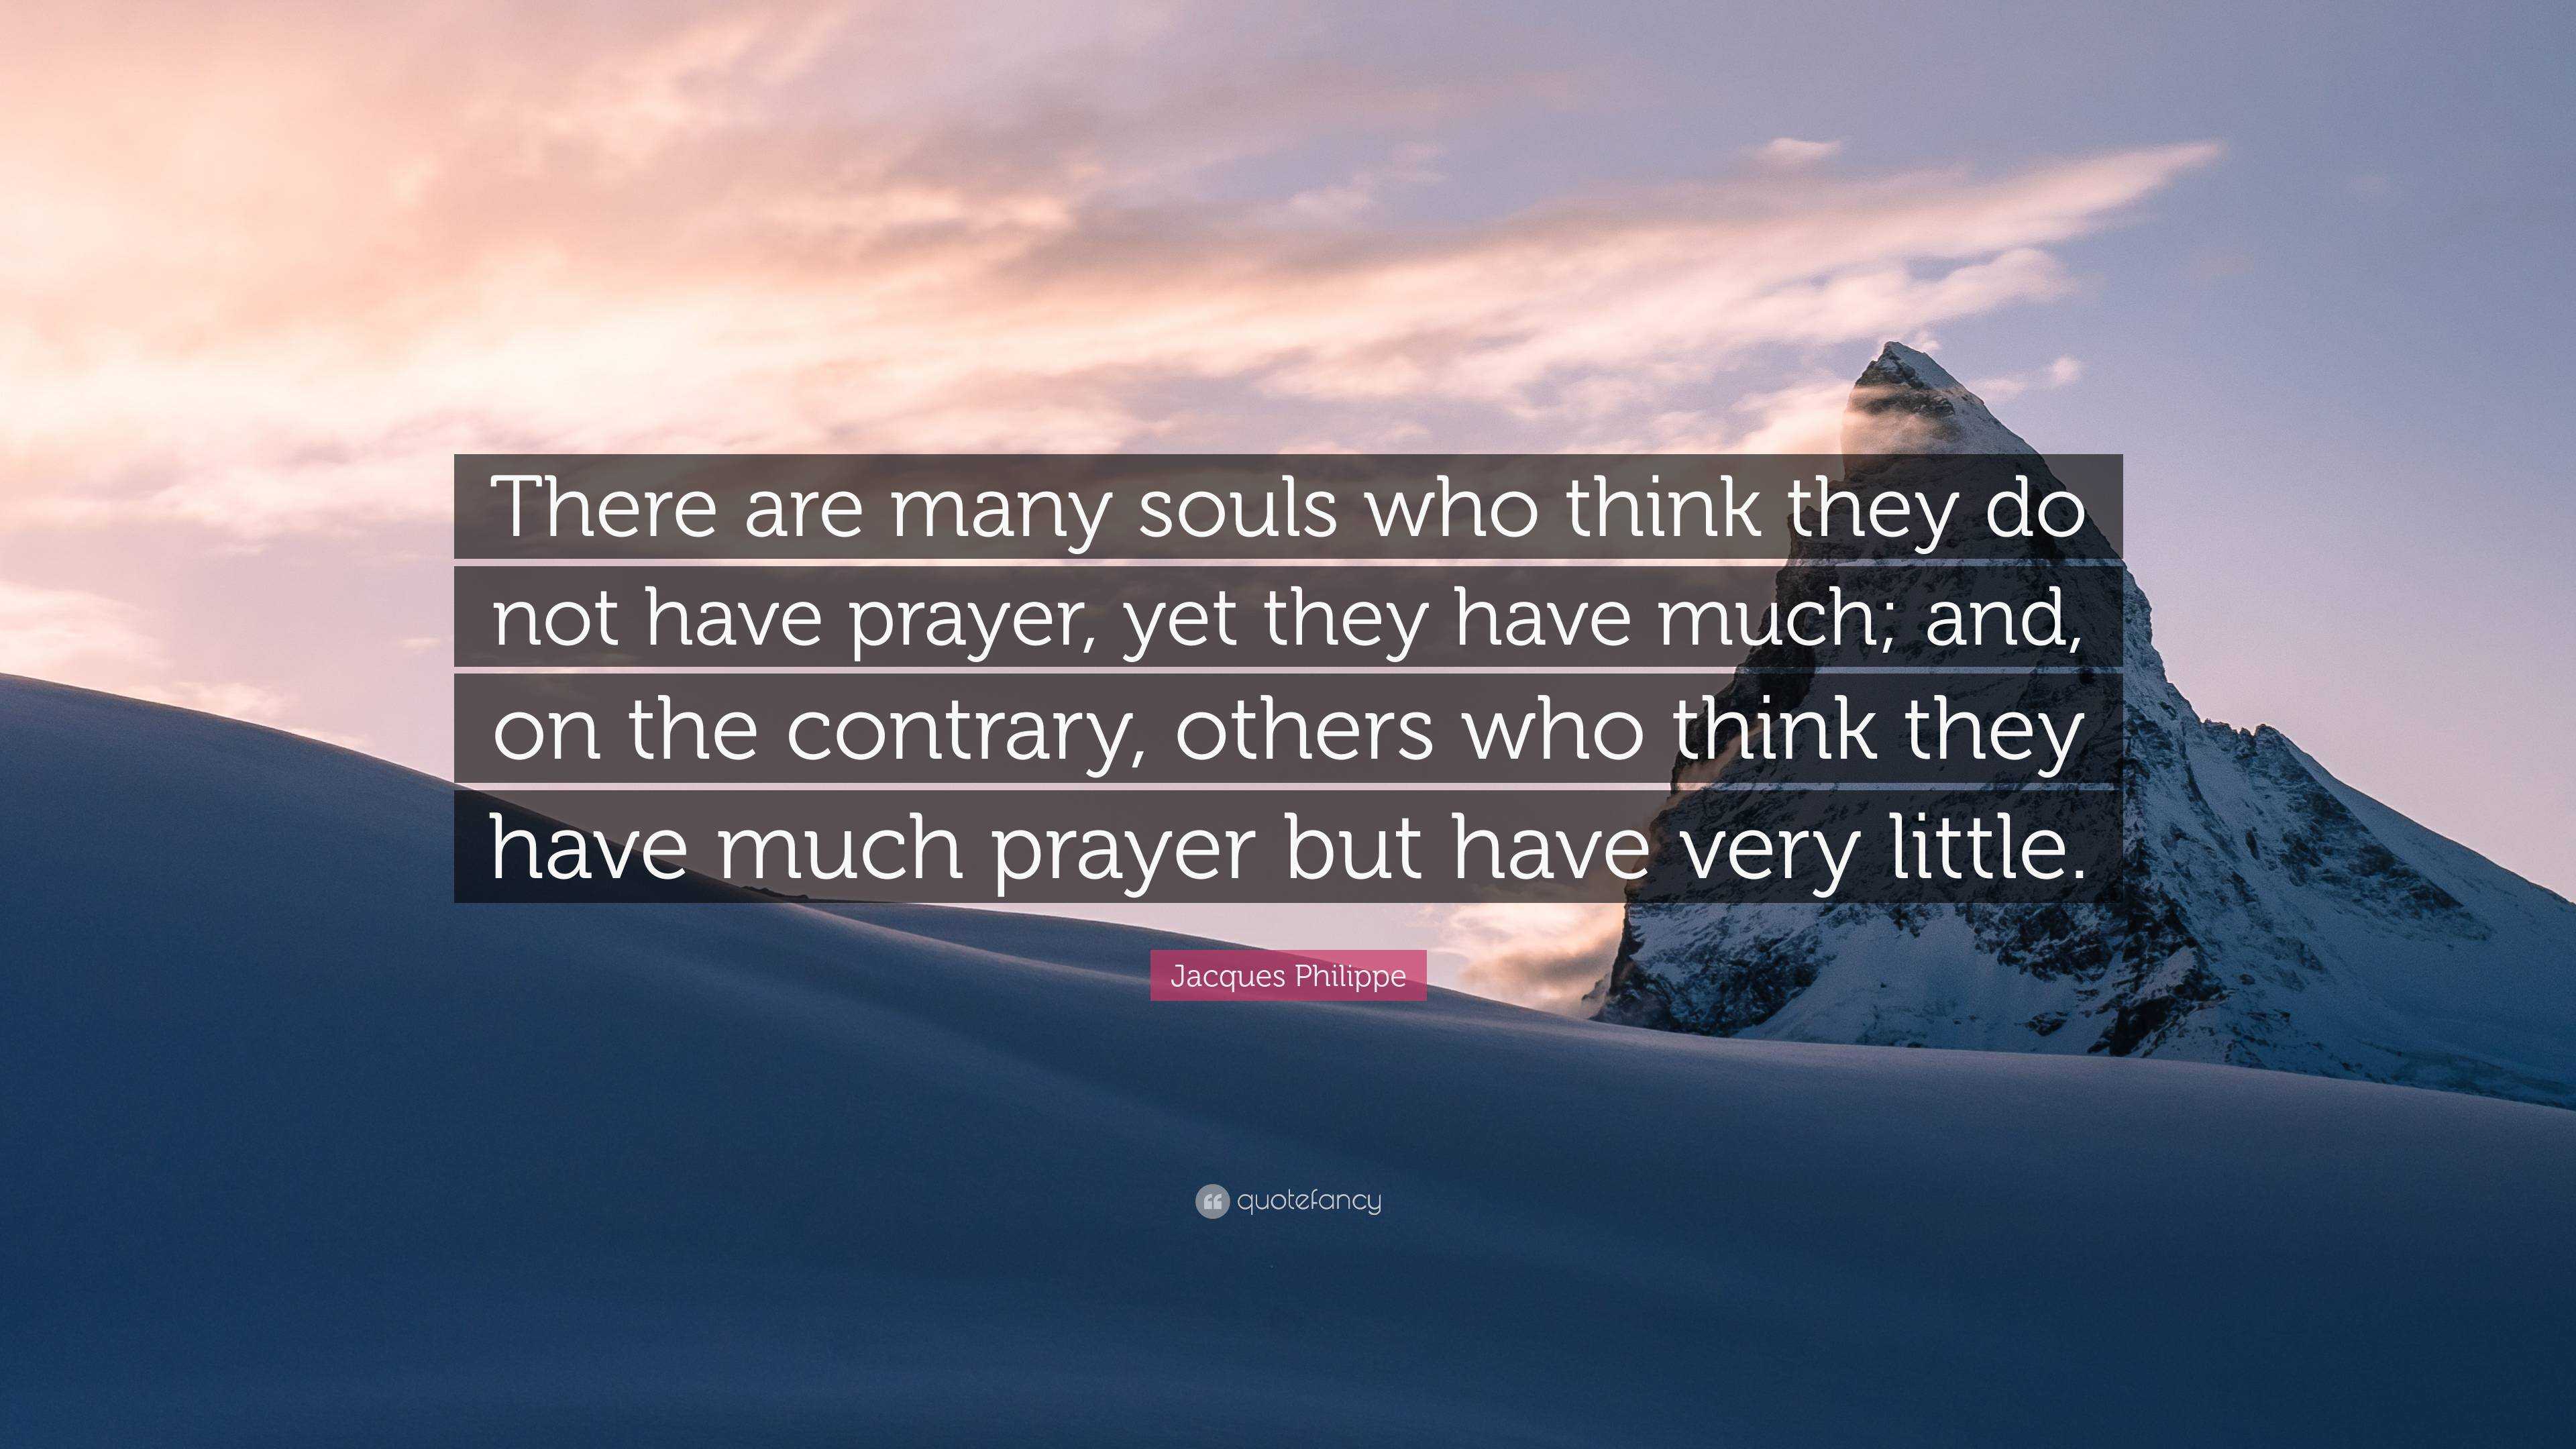 Jacques Philippe Quote: “There are many souls who think they do not ...